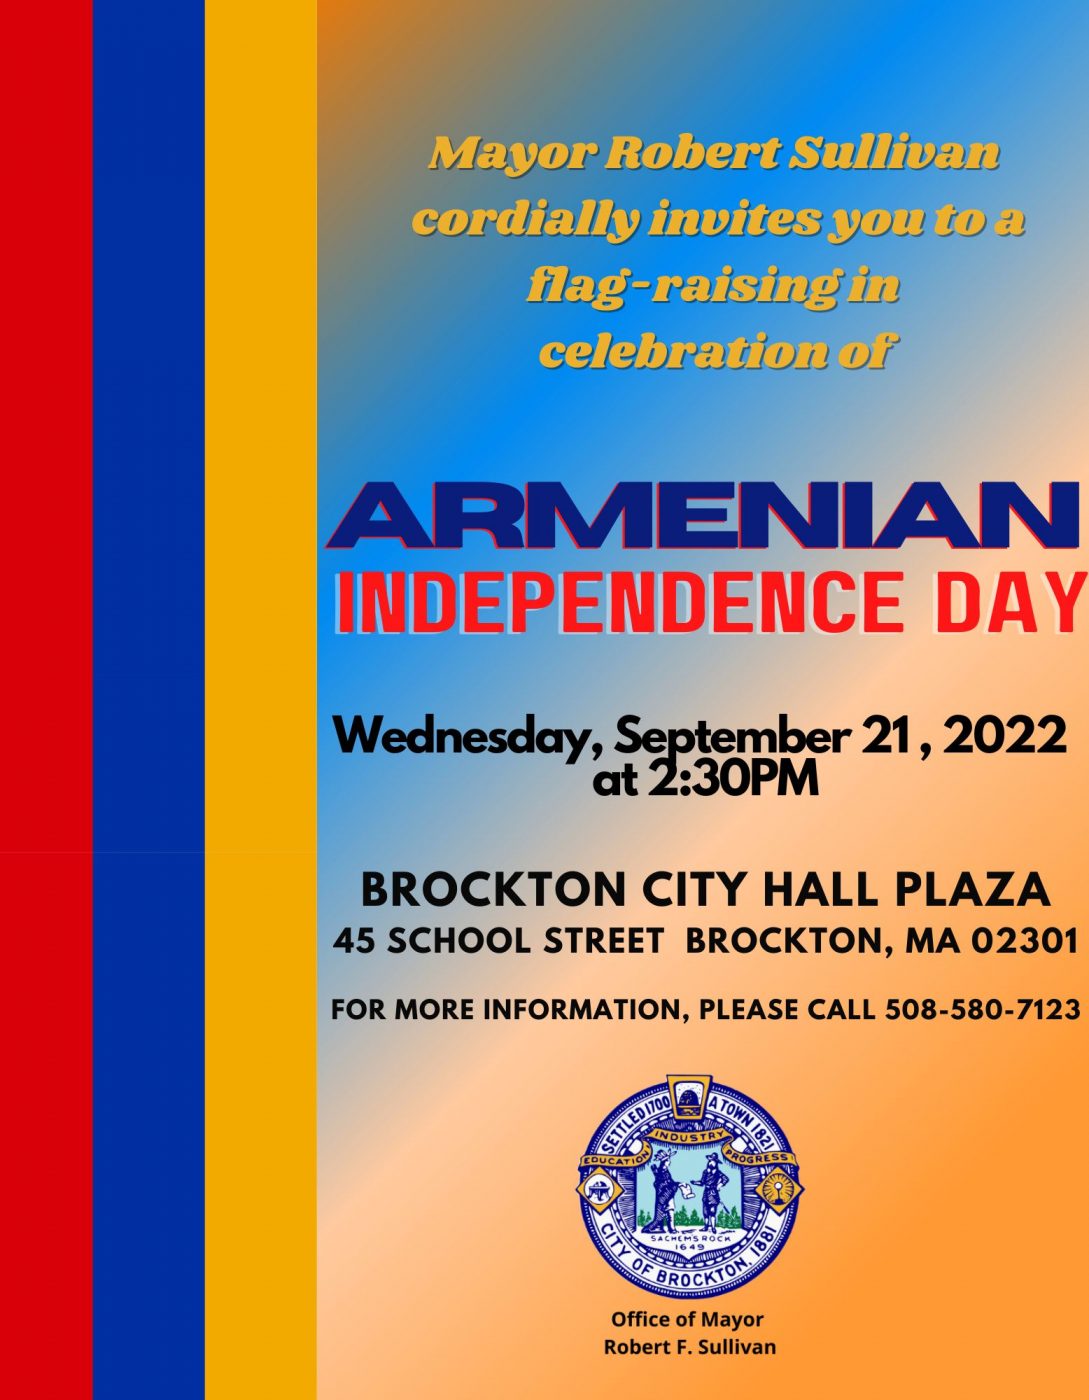 Armenian Independence day flyer 2022